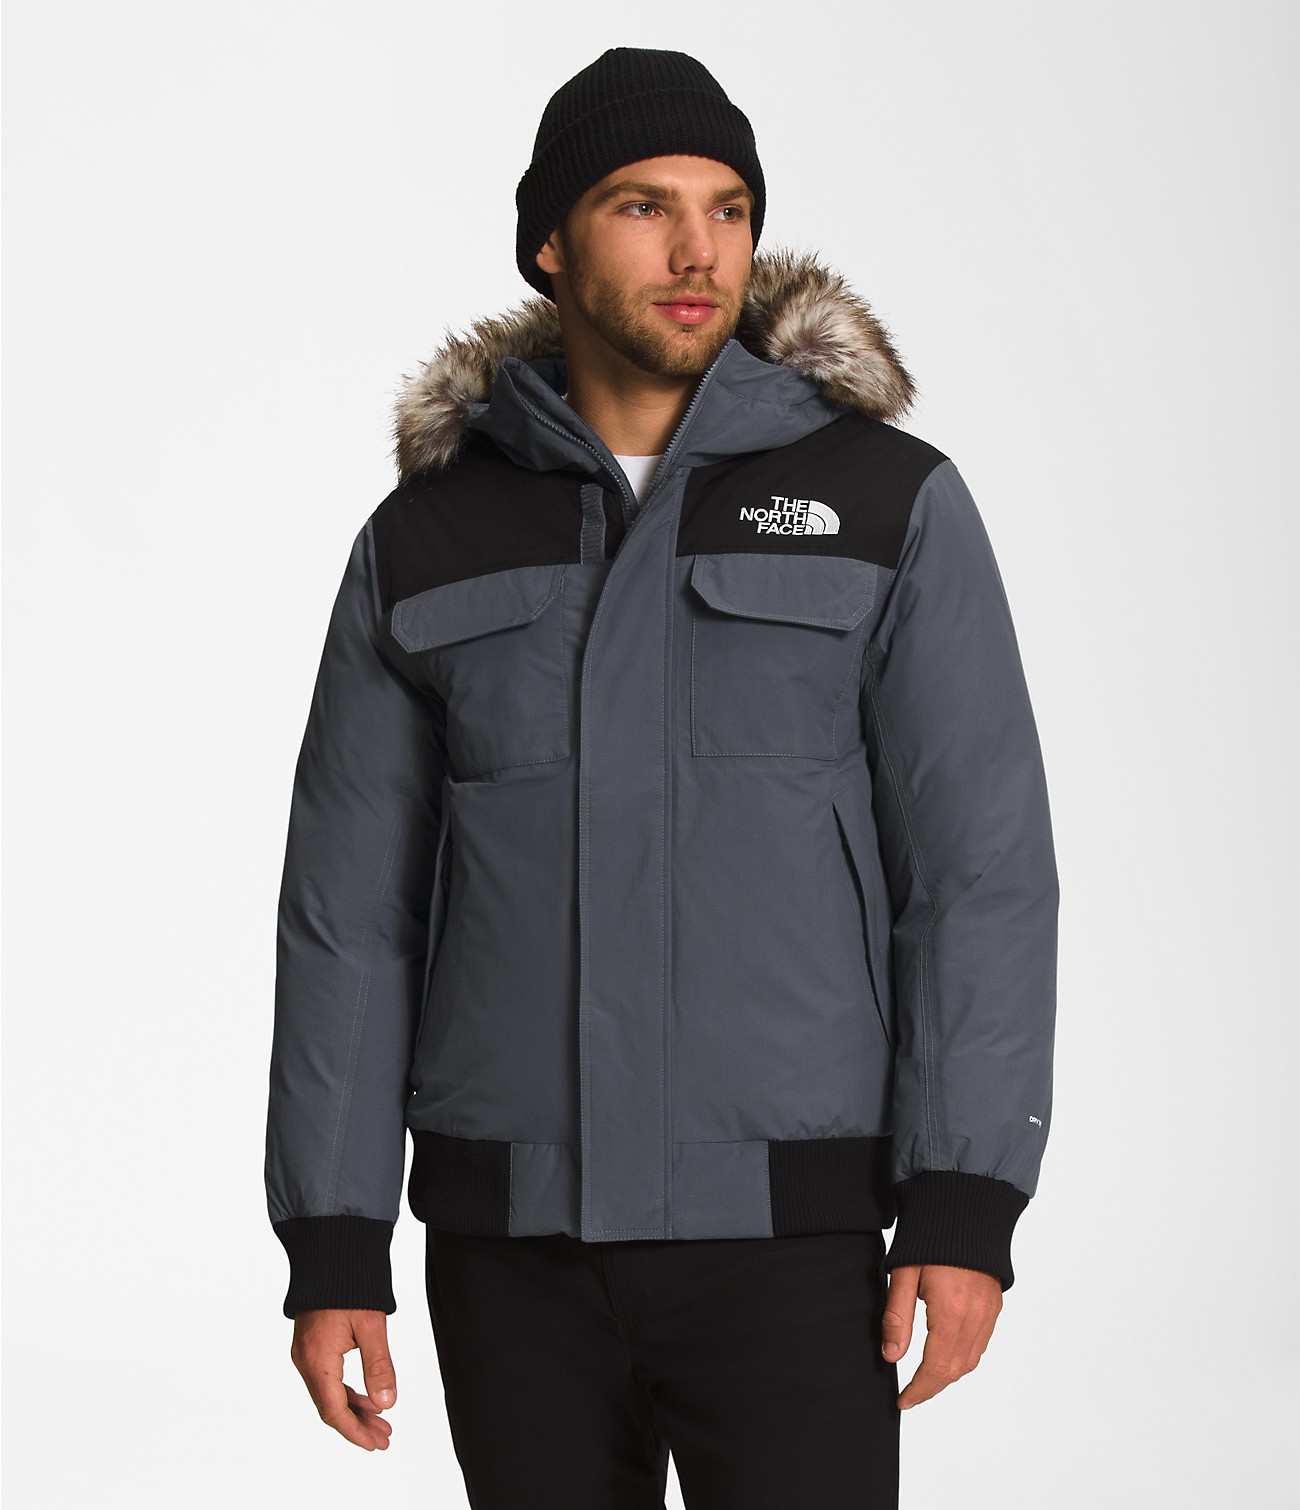 The North Face Big Adventures Sale: Up to 50% off on select styles